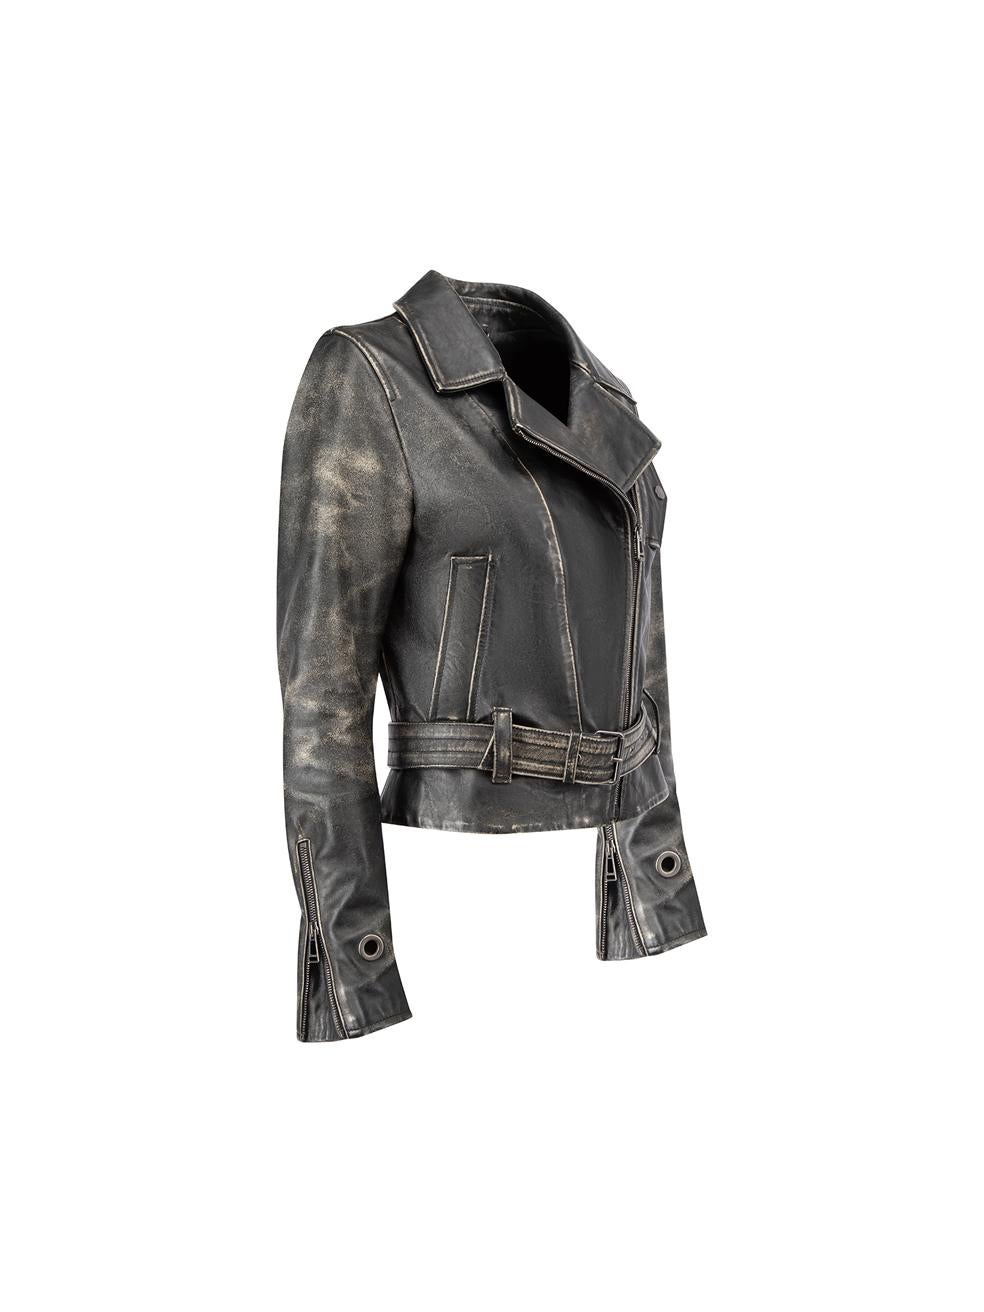 CONDITION is Very good. Hardly any visible wear to jacket is evident. Minor fading along inner labels from general wear on this used Belstaff designer resale item. 



Details


Anthracite

Leather

Biker jacket

Distressed accent

Front asymmetric